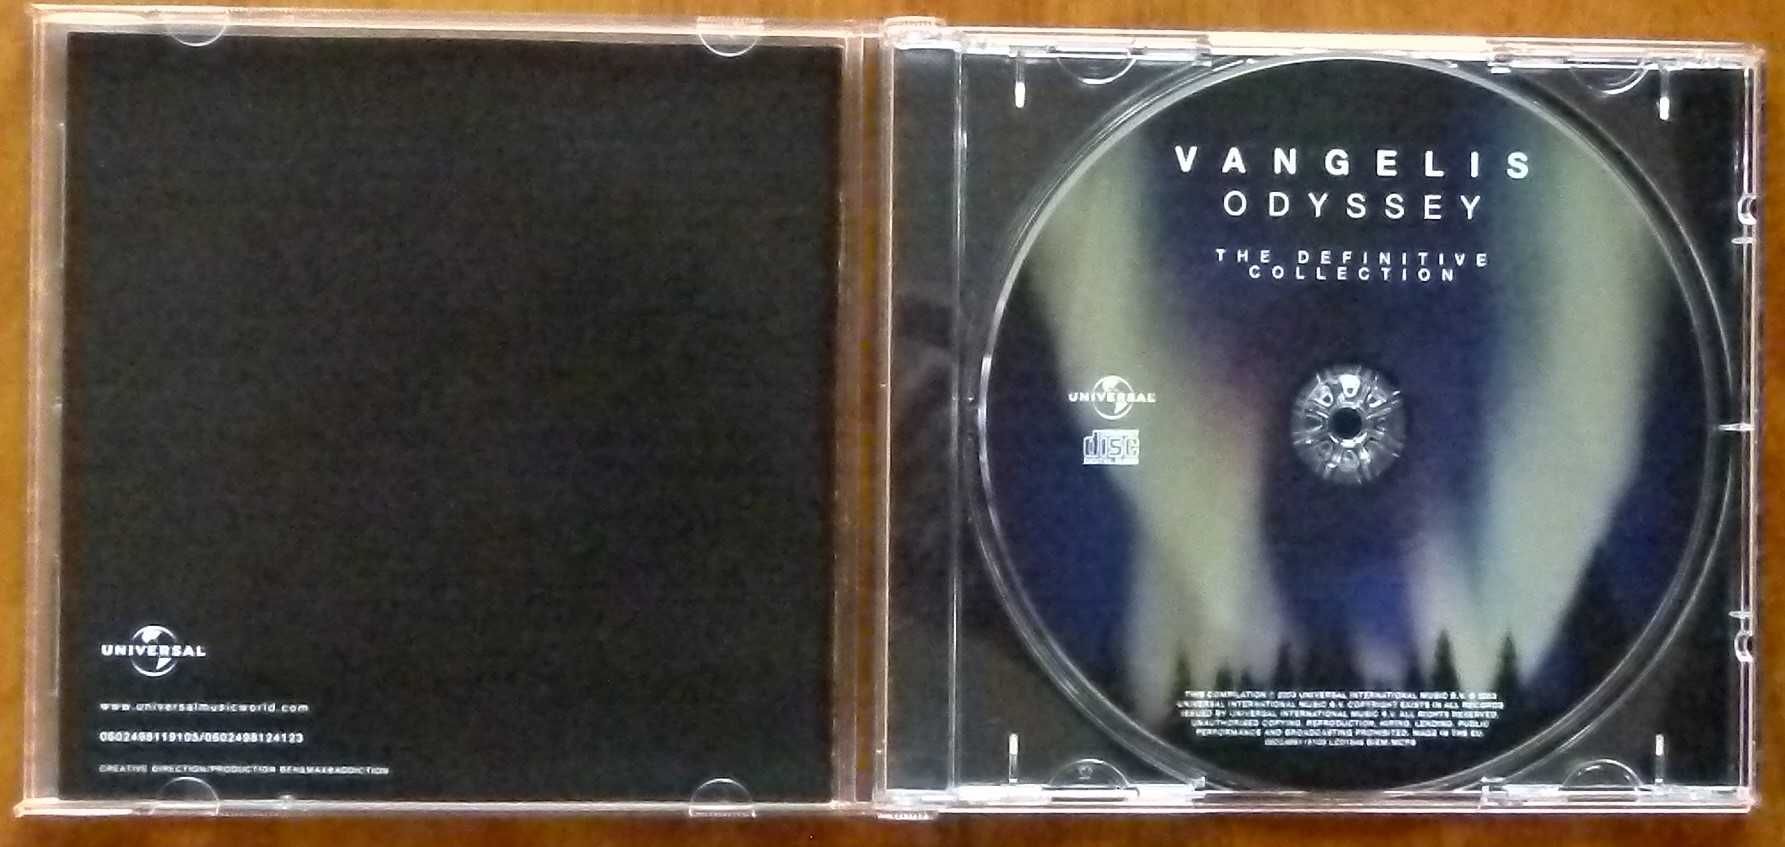 Vangelis- Odyssey, the Definitive Collection